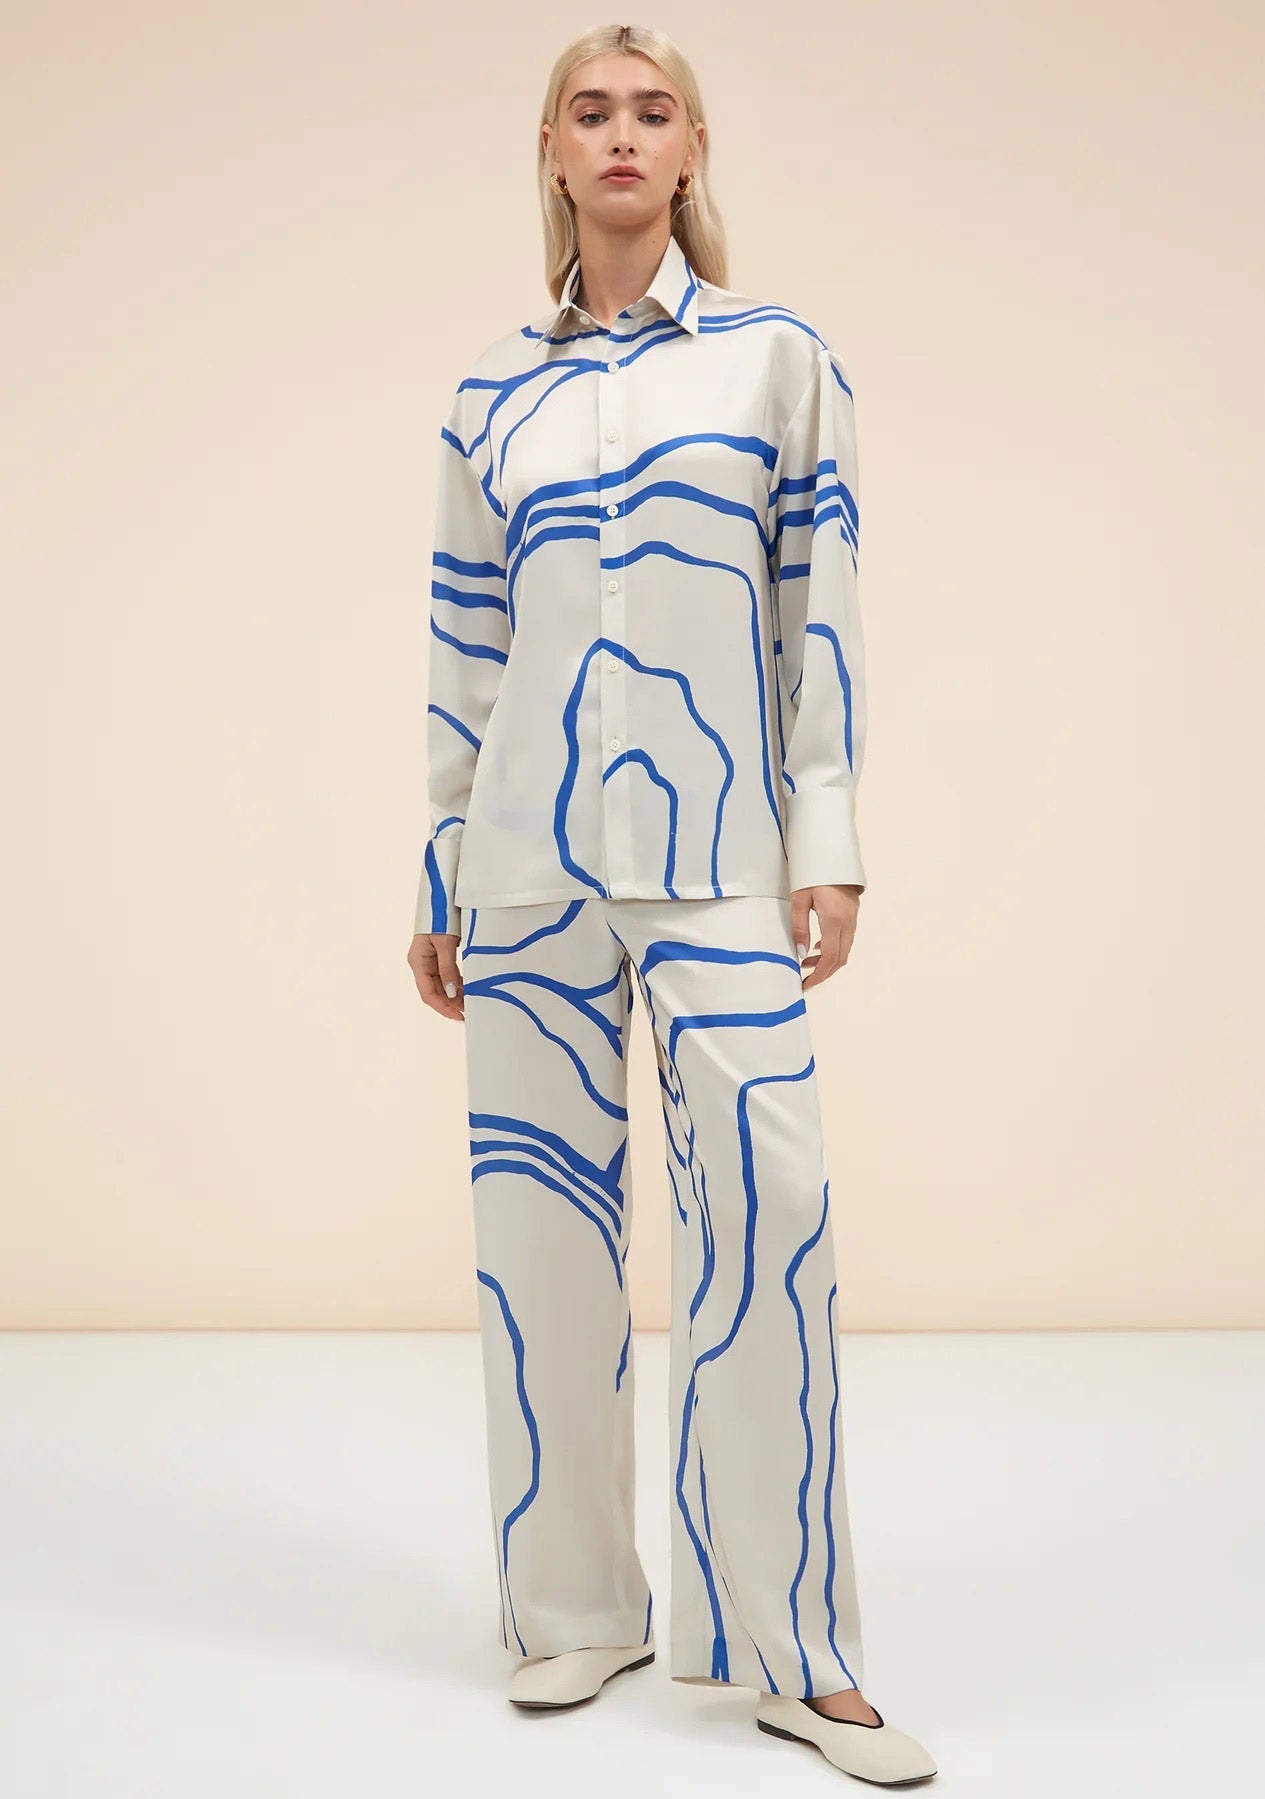 Blue abstract pattern co-ord set with wide leg pants and button up shirt fashionable womenswear 